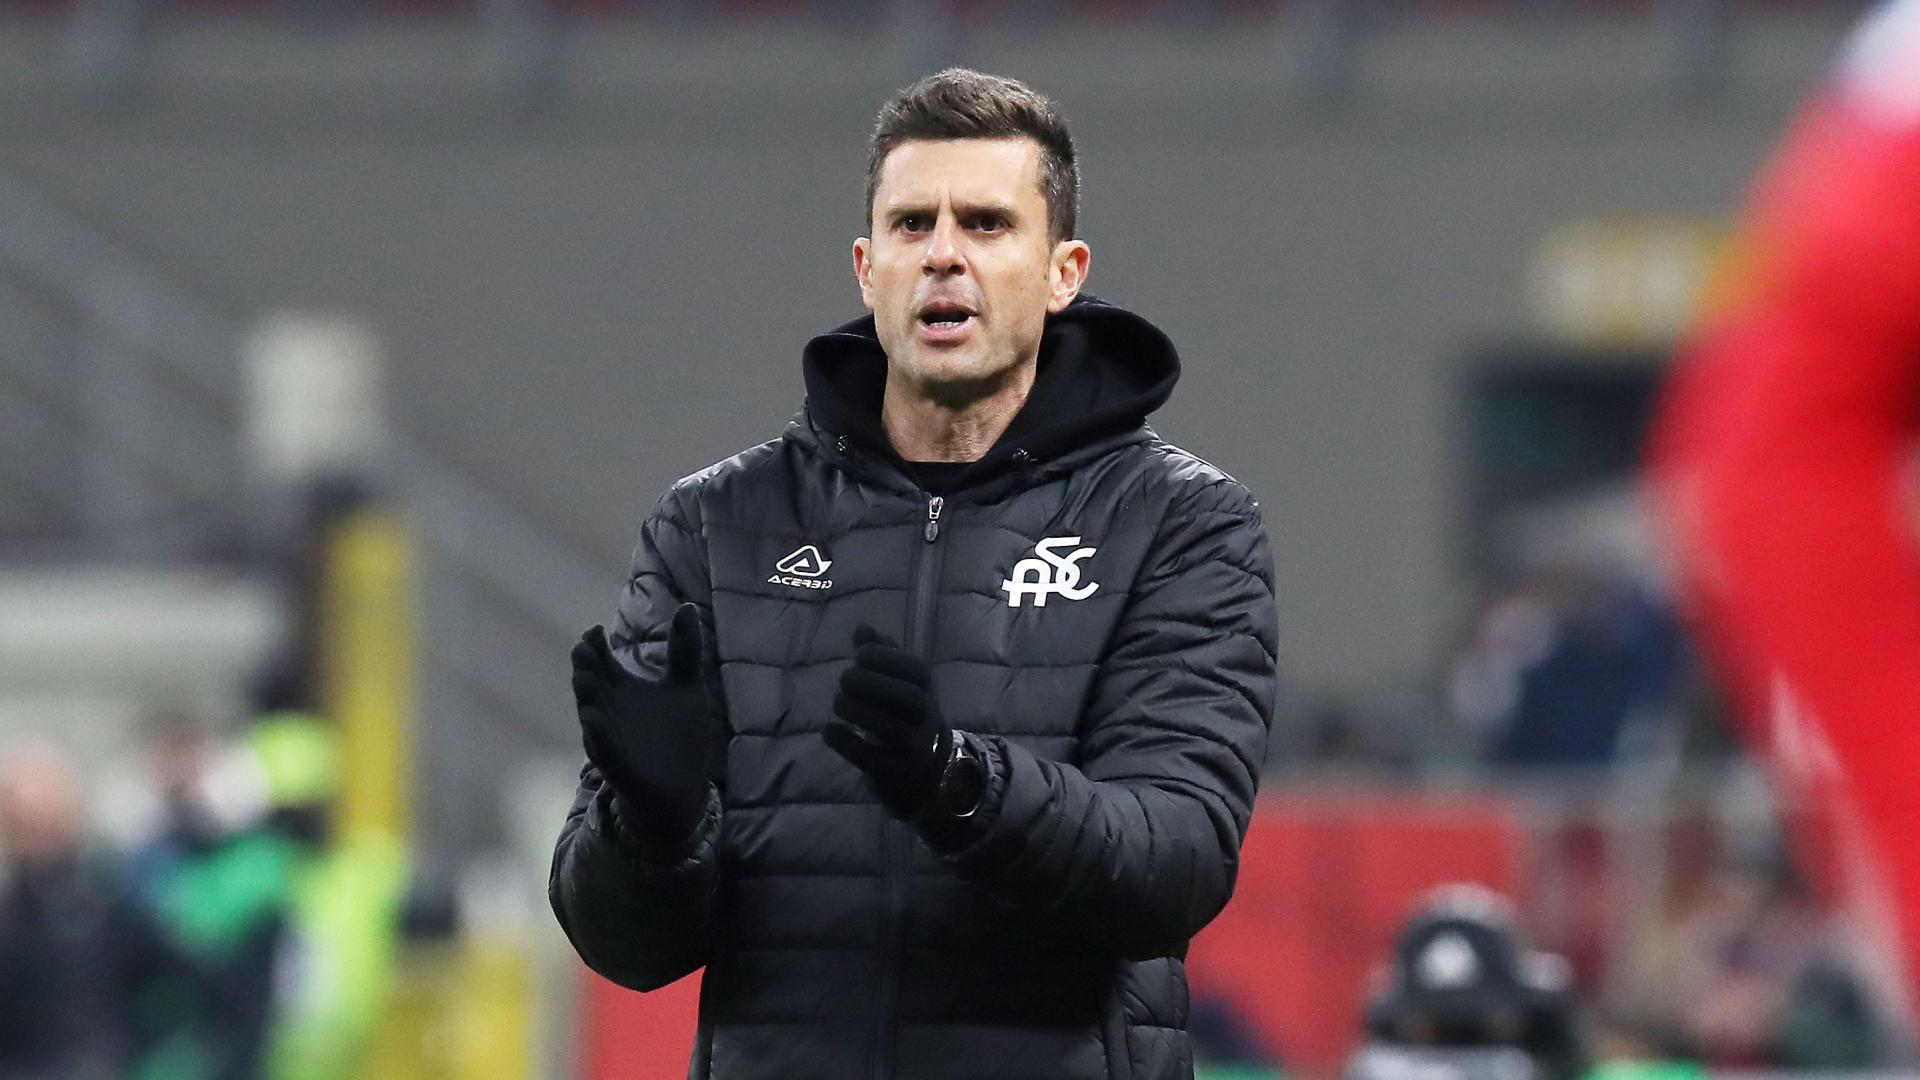 Thiago Motta: "happy for the team, the club, and the fans"